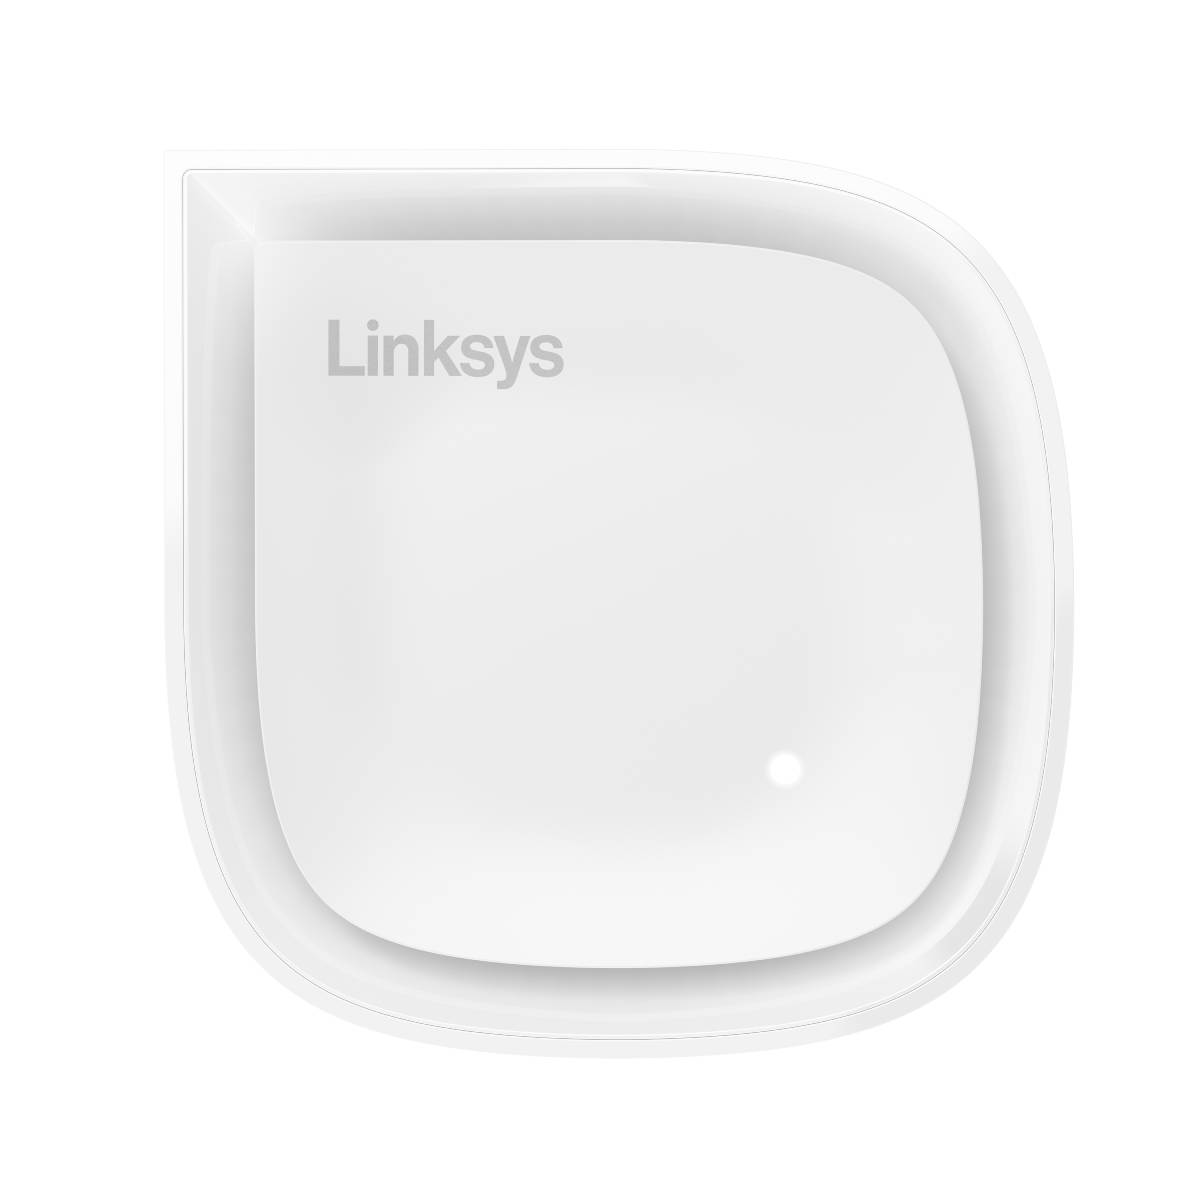 Linksys Velop Pro 7 Tri-Band BE11000 Cognitive Mesh WiFi 7 Router (MBE7001) (1-Pack), , large image number 4